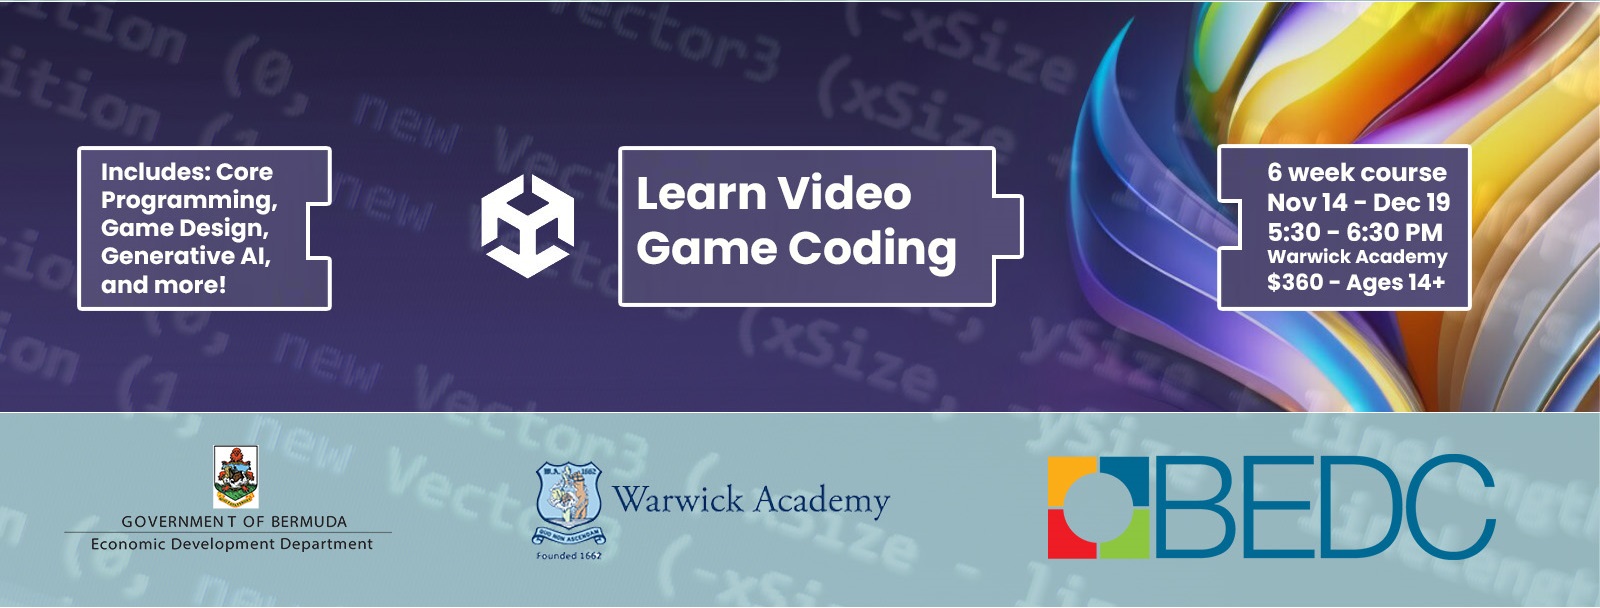 Learn Video Game Coding